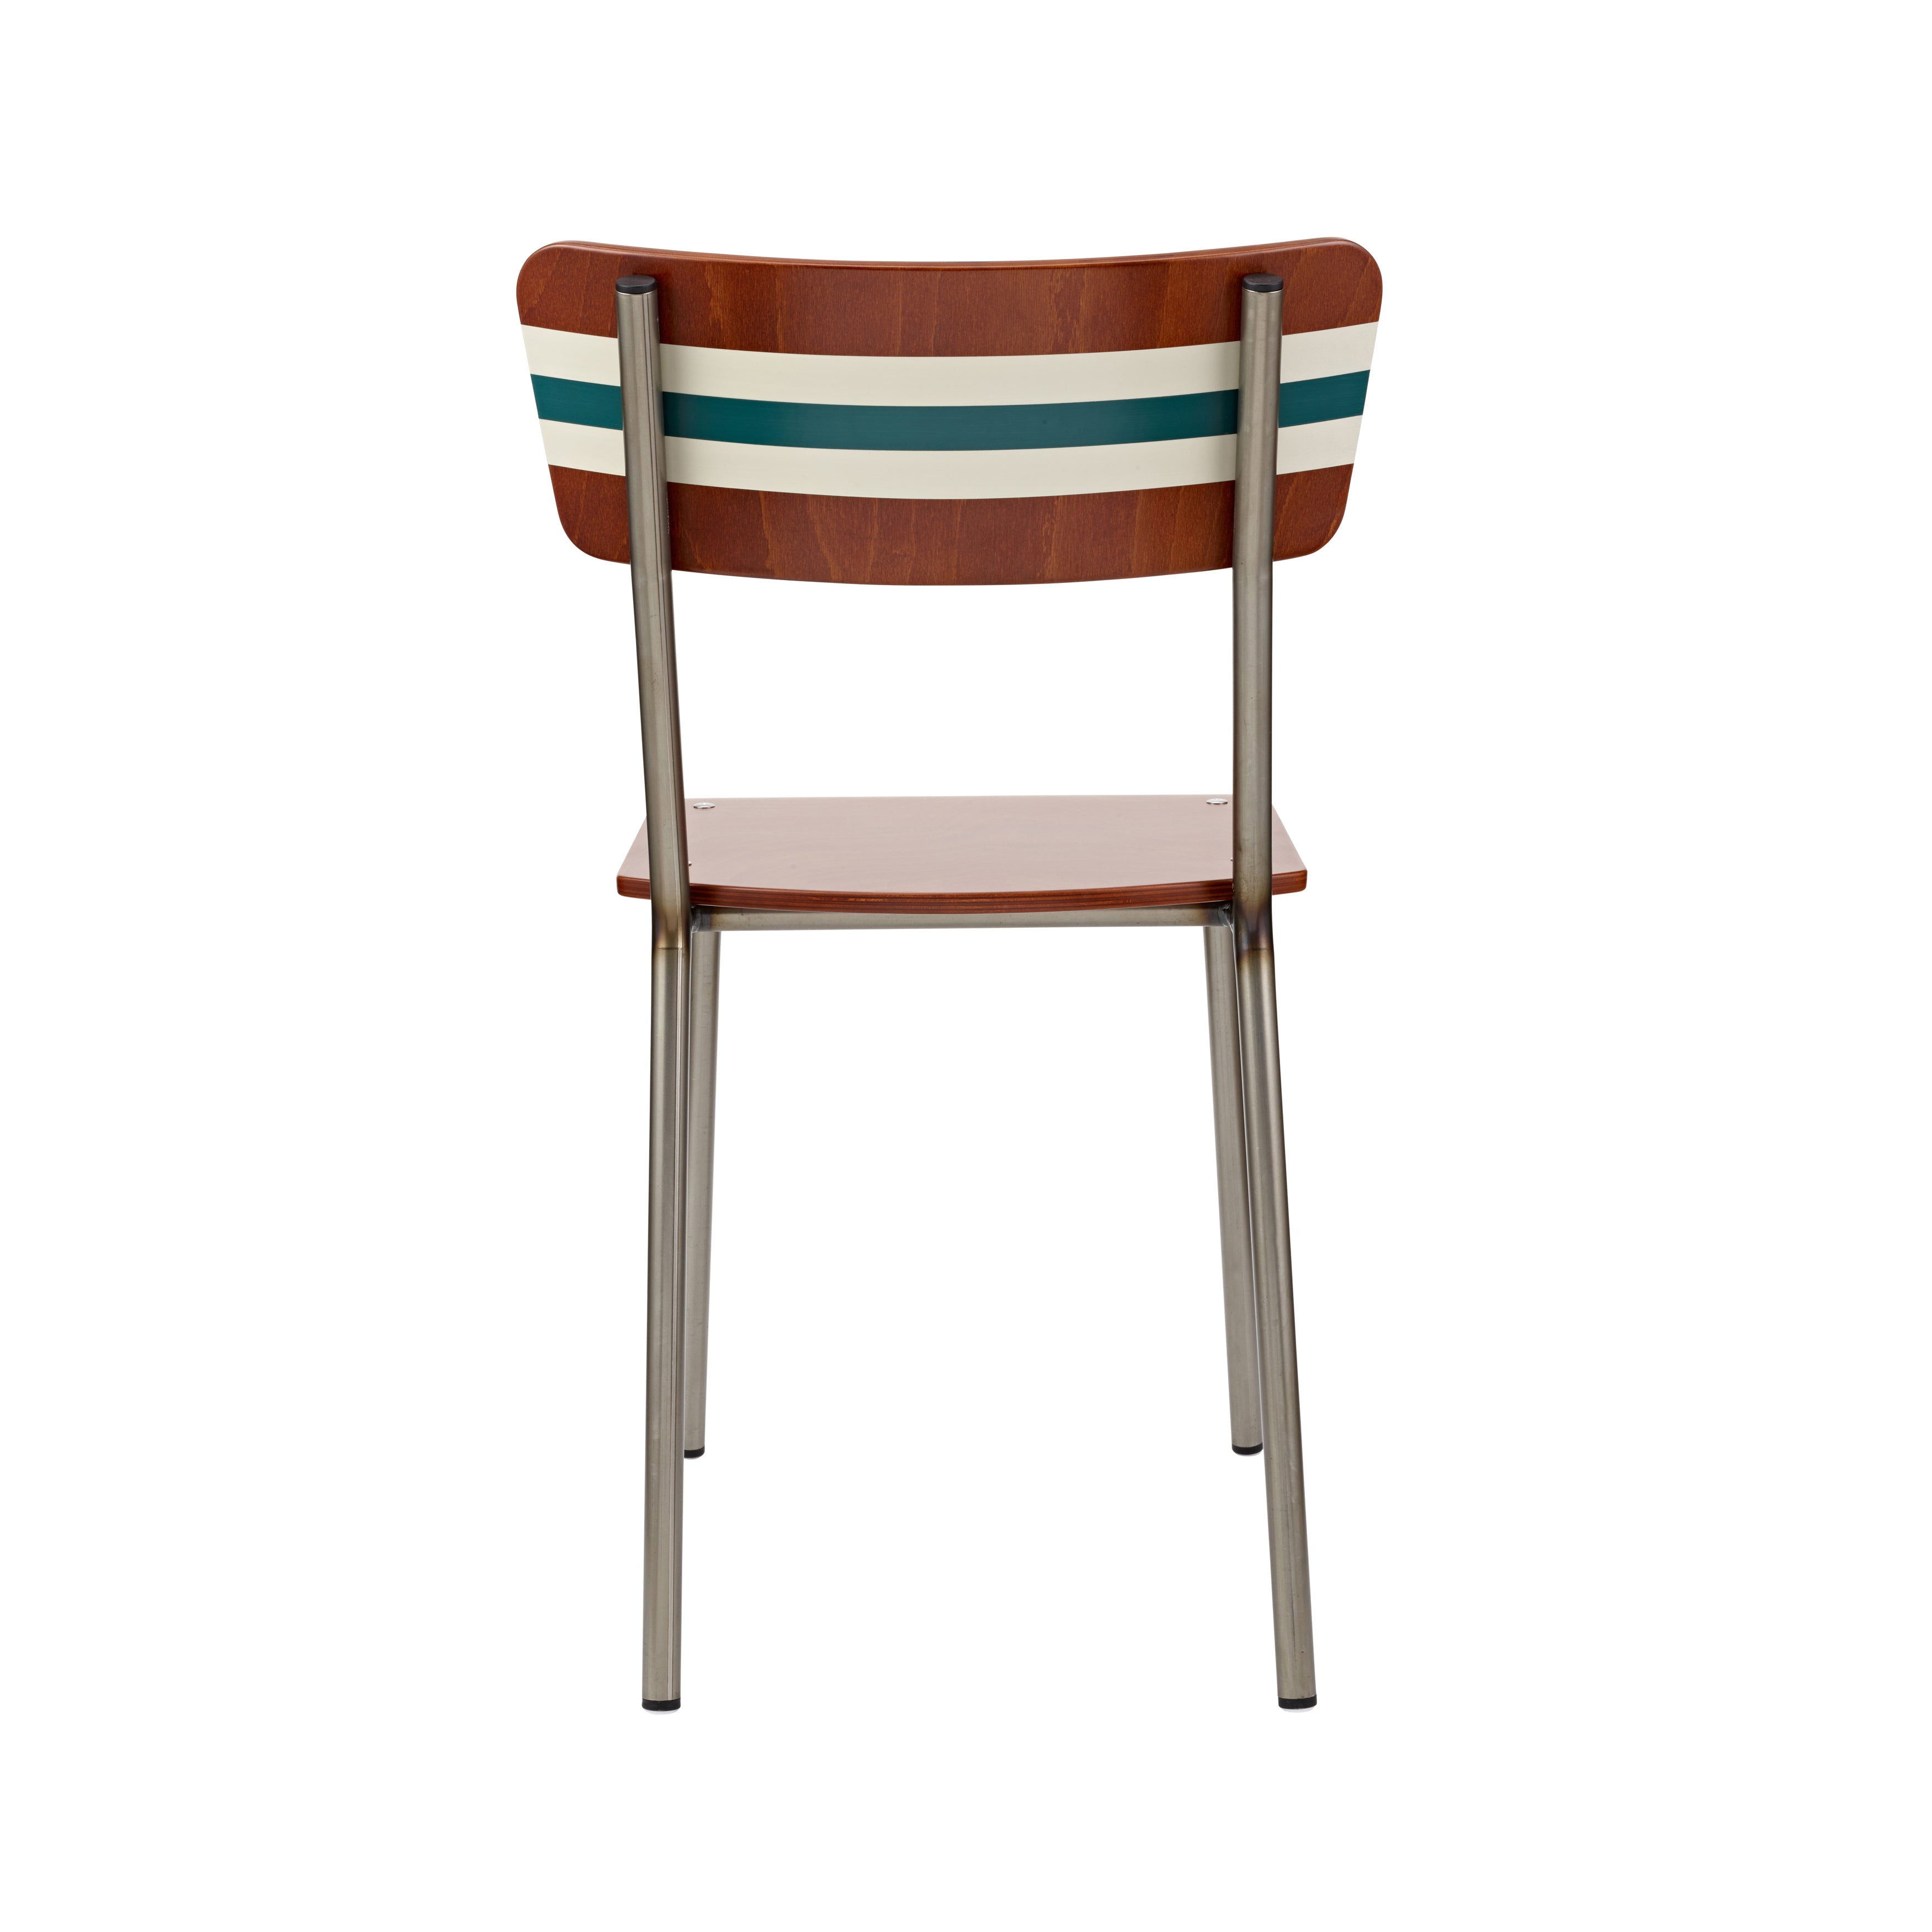 find-contemporary-british-school-chairs-to-buy-in-the-warehouse-home-shop